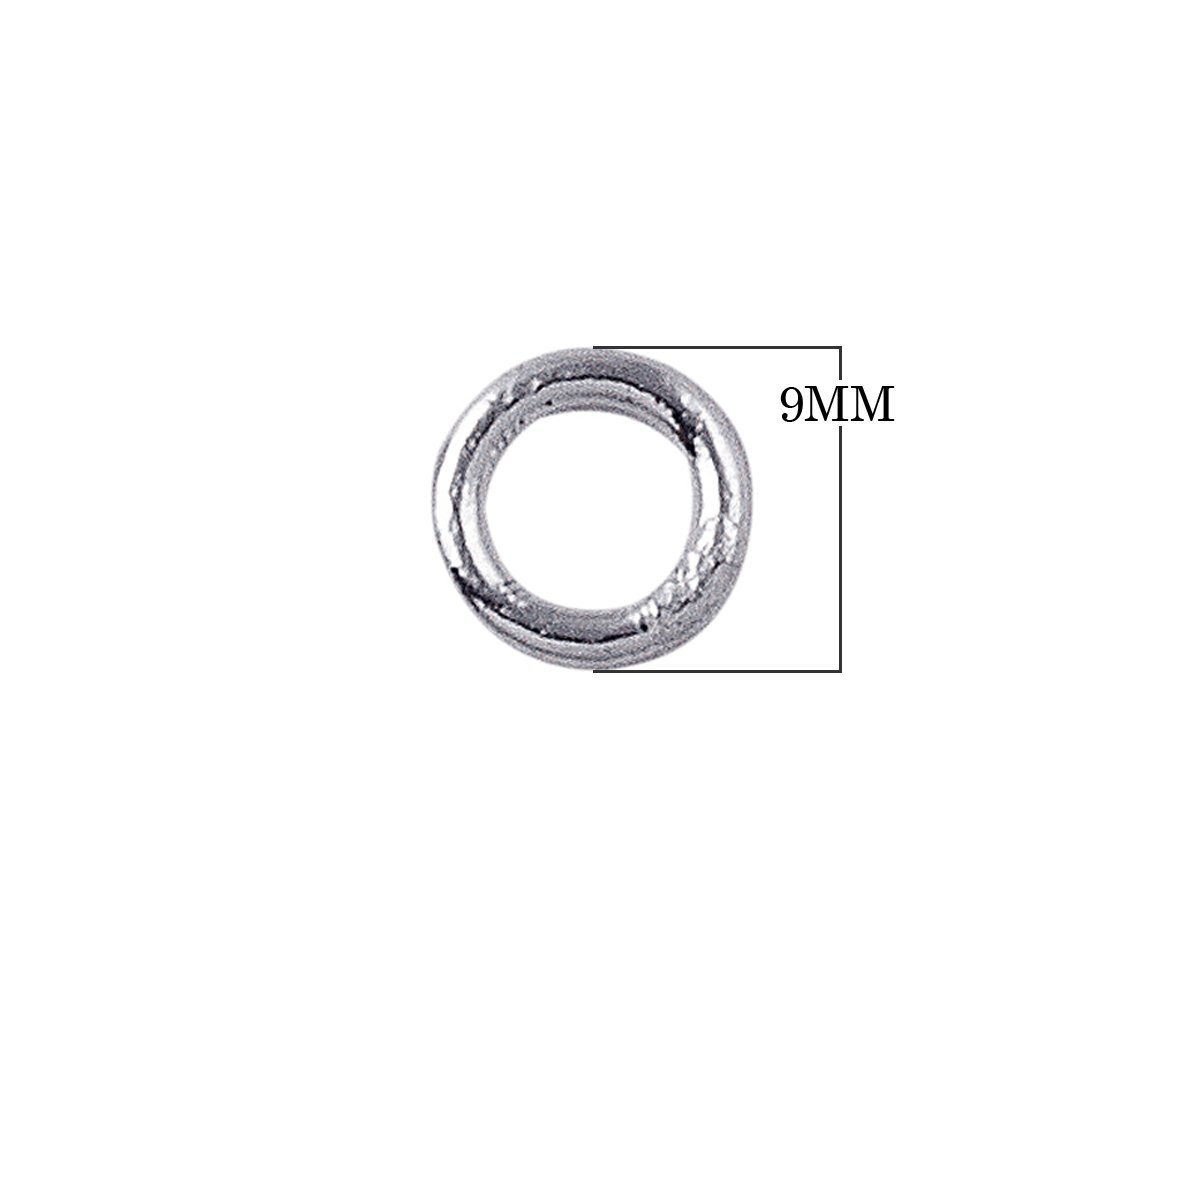 Silver Open Jumped Rings 15ga #212 100 ct 9mm